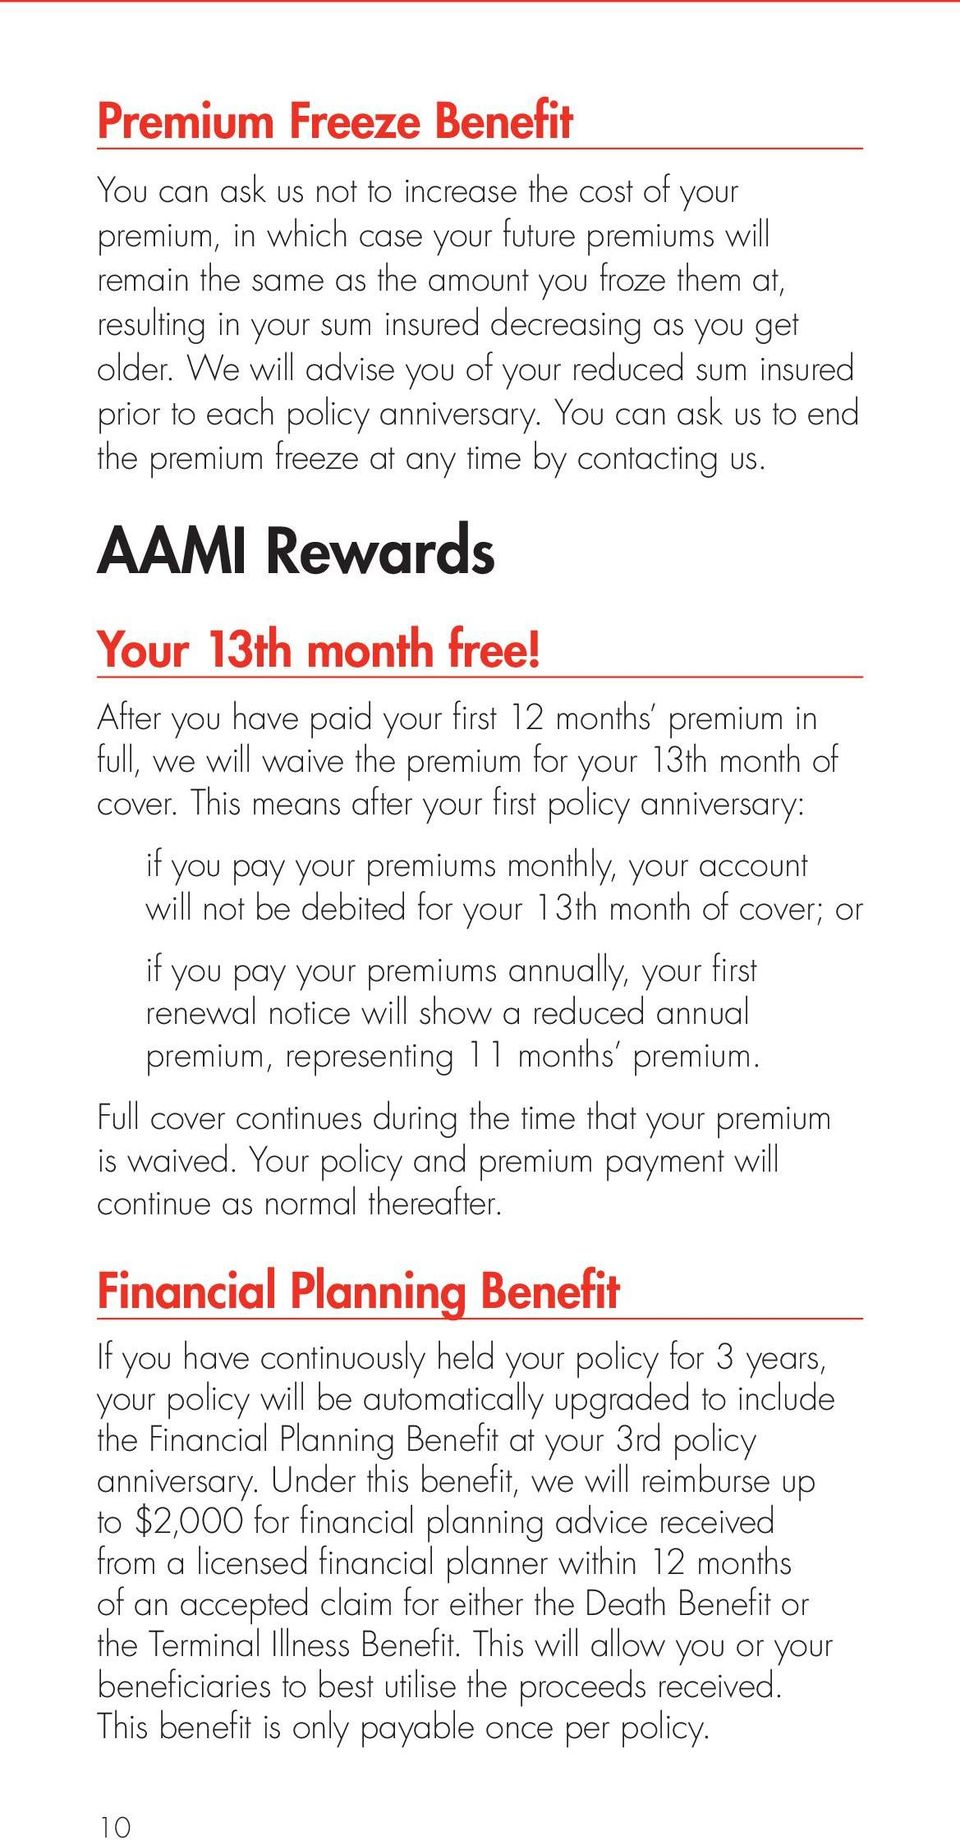 AAMI Rewards Your 13th month free! After you have paid your first 12 months premium in full, we will waive the premium for your 13th month of cover.